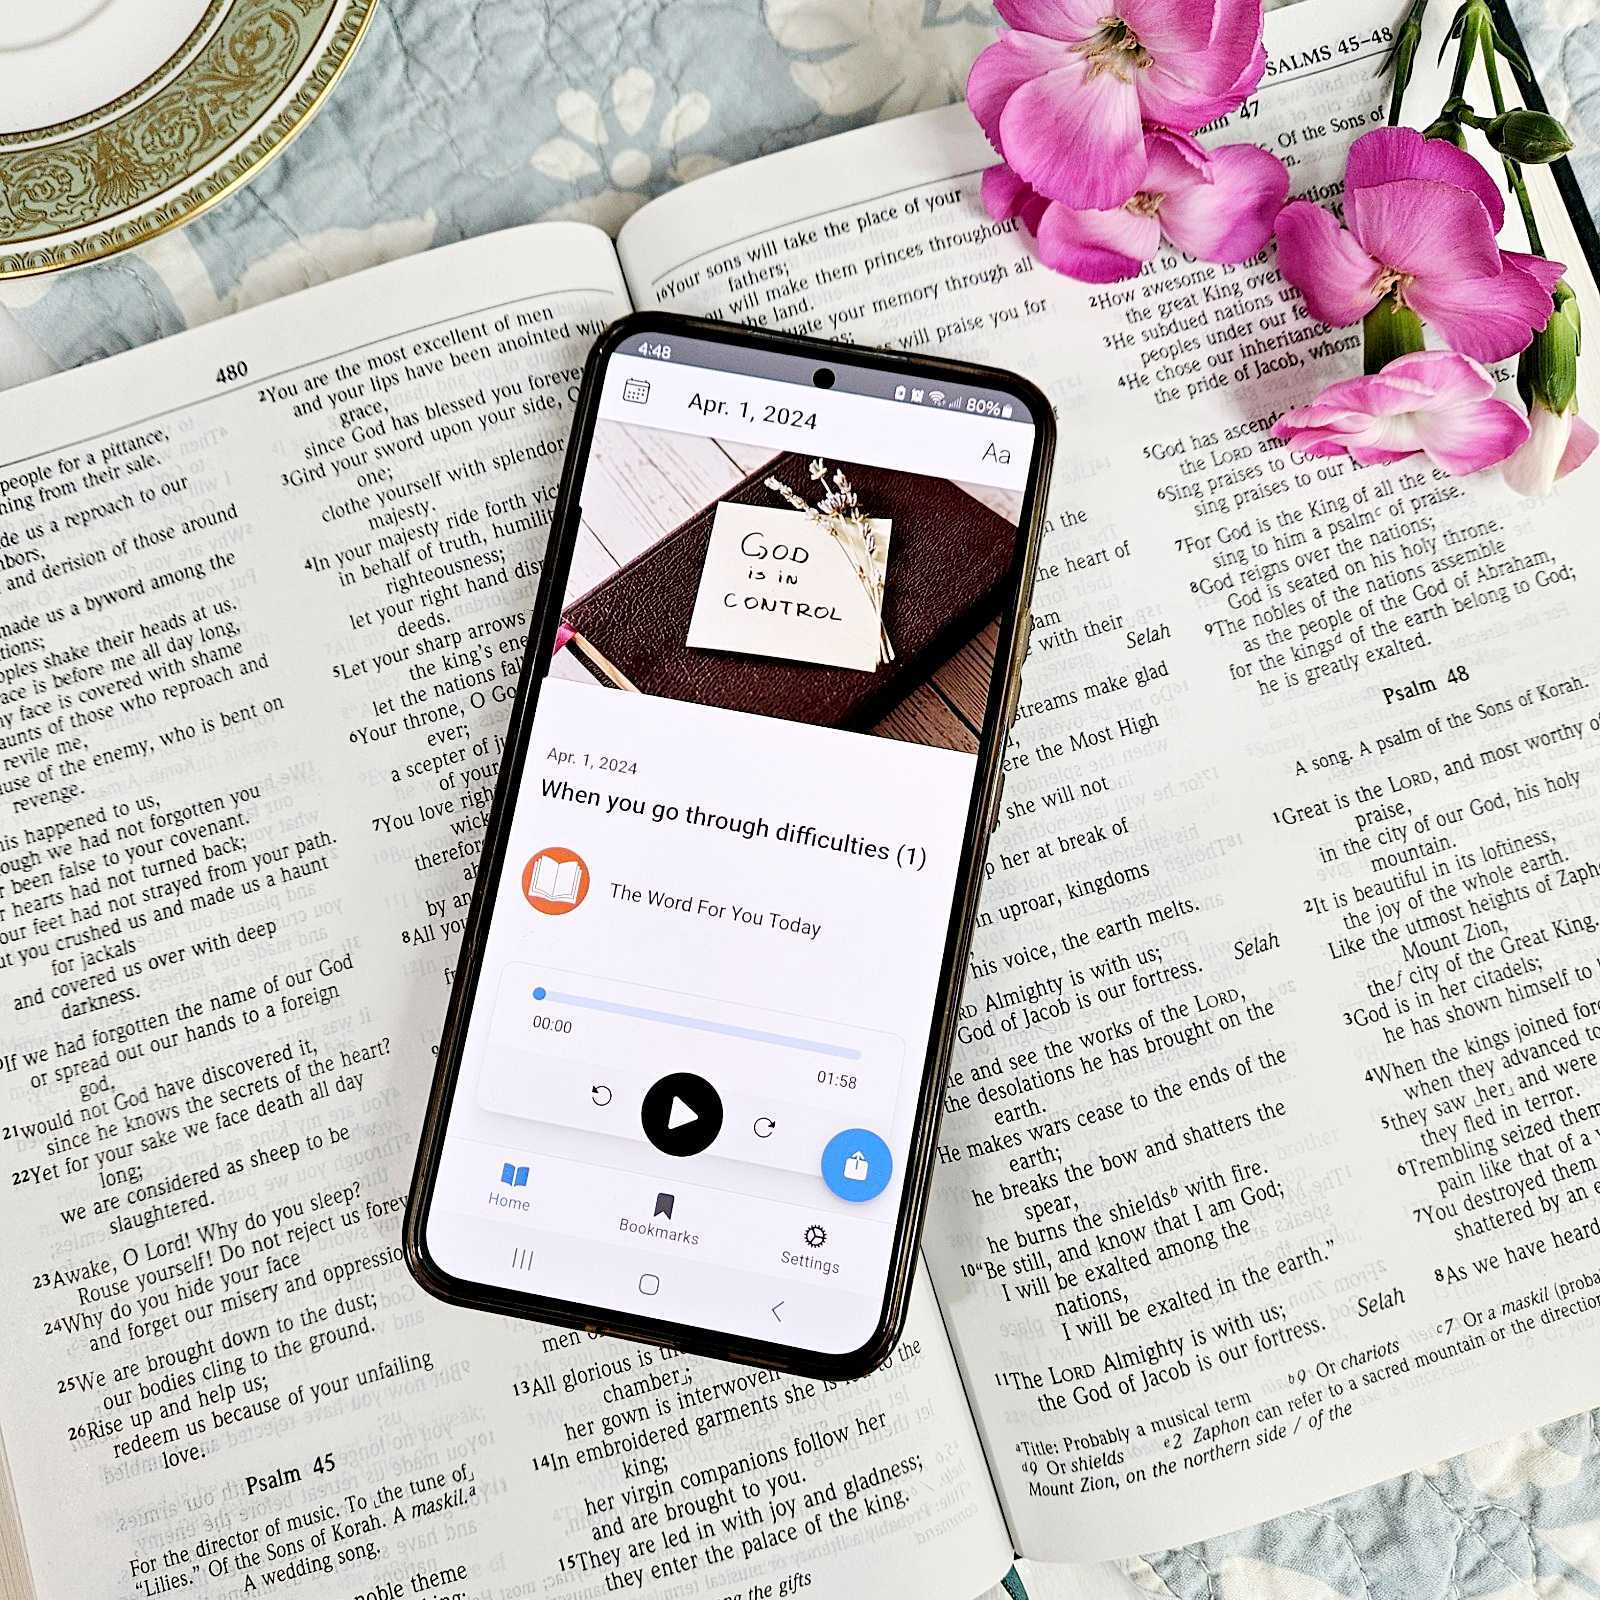 Our App for Daily Devotions